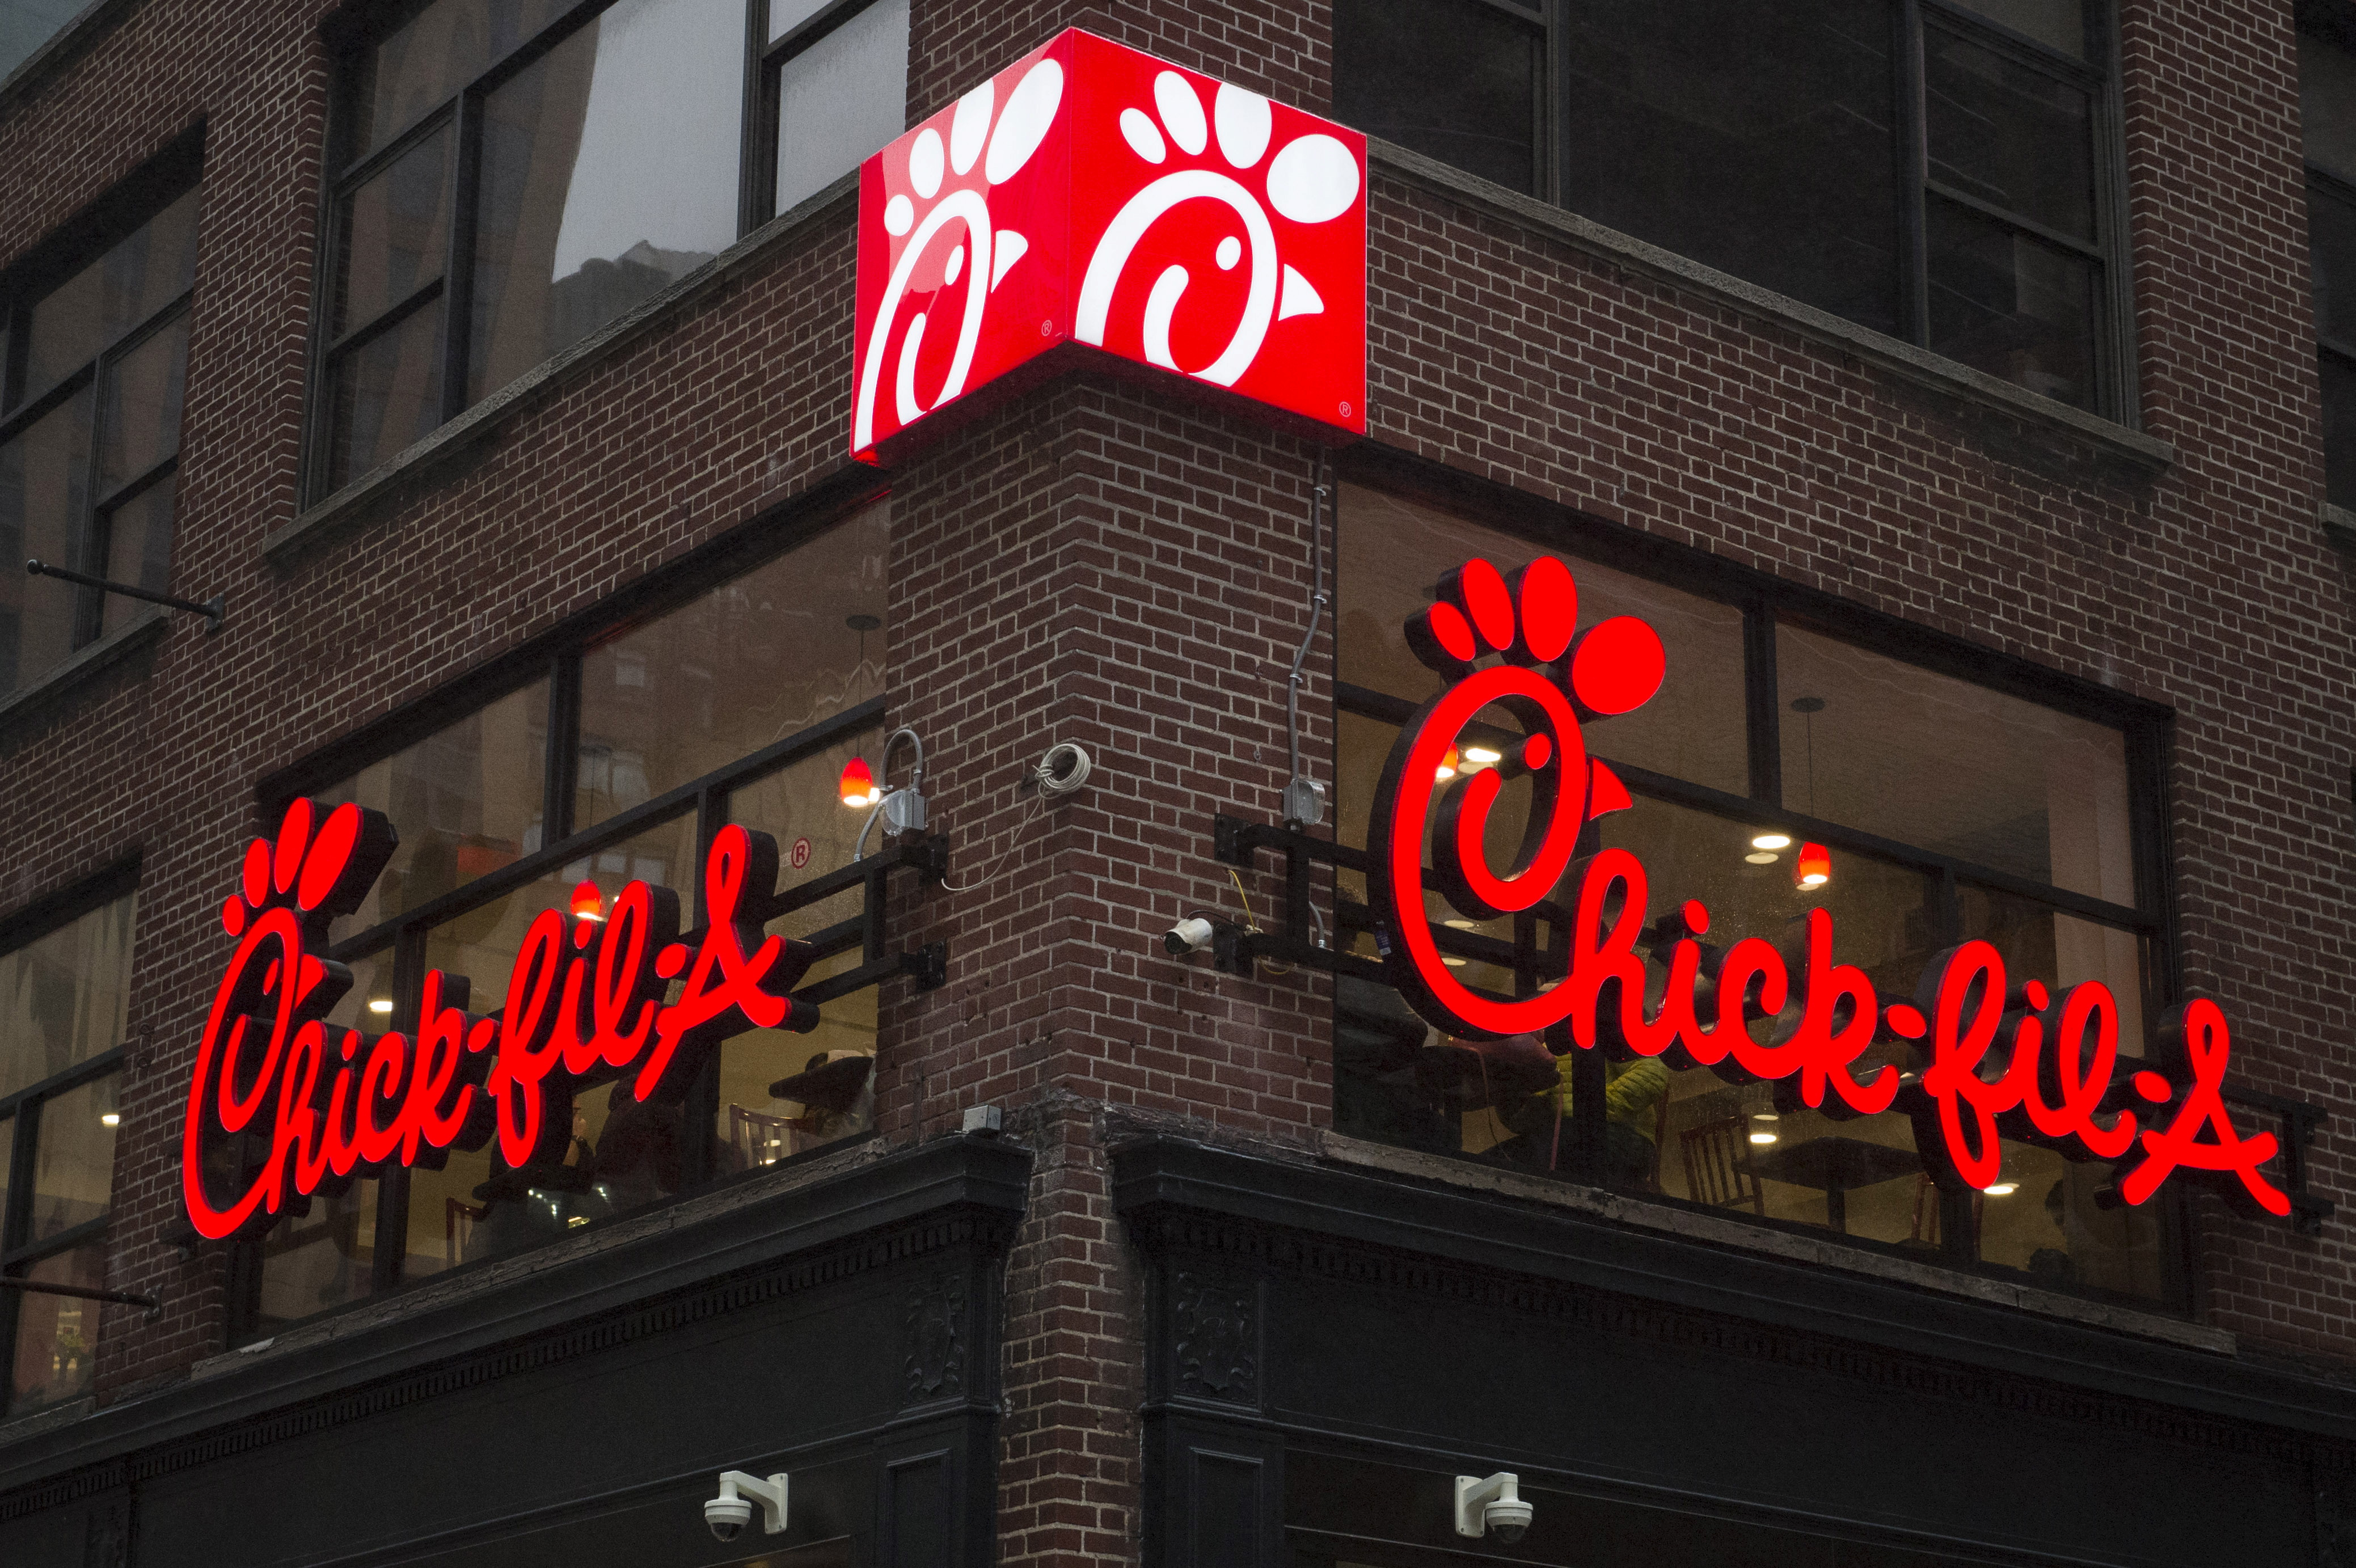 A franchise sign is seen above a Chick-fil-A freestanding restaurant after its grand opening in Midtown, New York